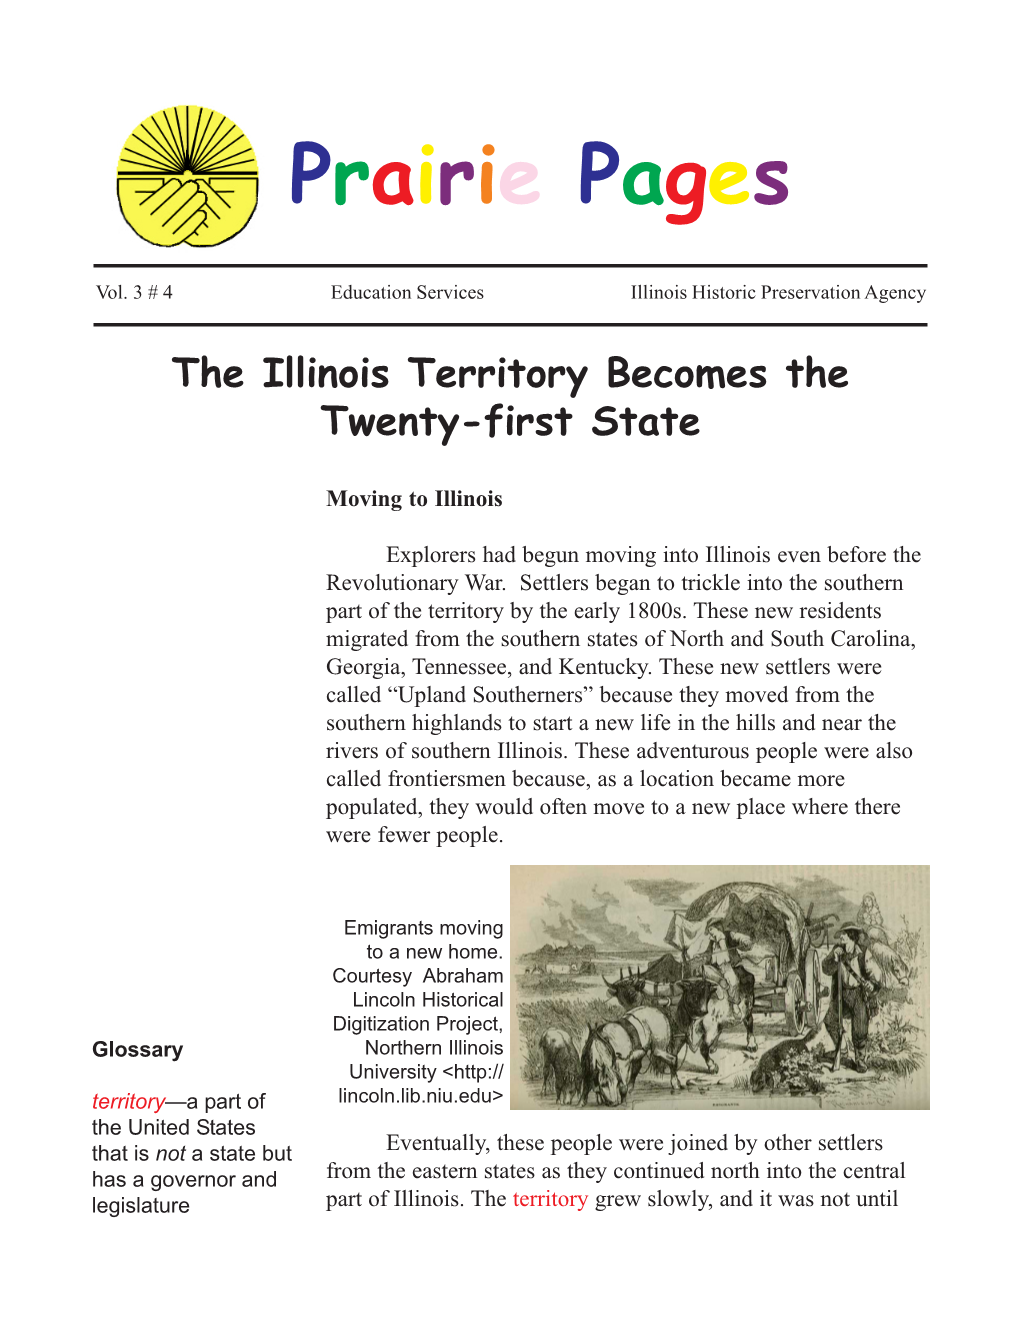 The Illinois Territory Becomes the Twenty-First State